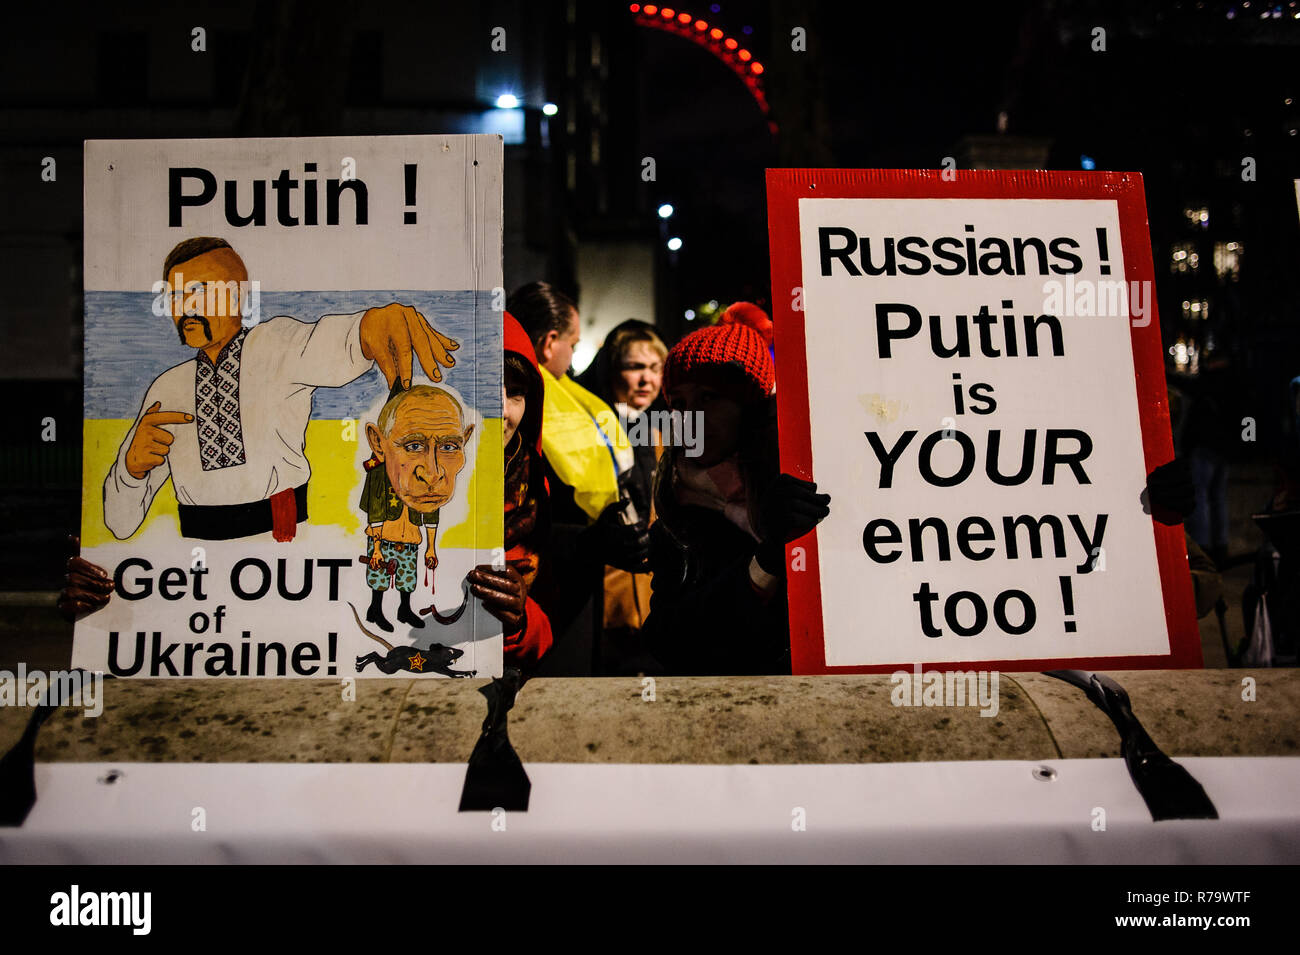 Placards seen on the side of the street during the demonstration. Ukrainian expats held an anti-Putin demonstration opposite Downing Street on Whitehall in central London. Tensions between Ukraine and Russia have reached a new height in recent weeks with the Russian seizure of three Ukrainian naval vessels, prompting Ukraine to declare martial law in several border regions. Stock Photo